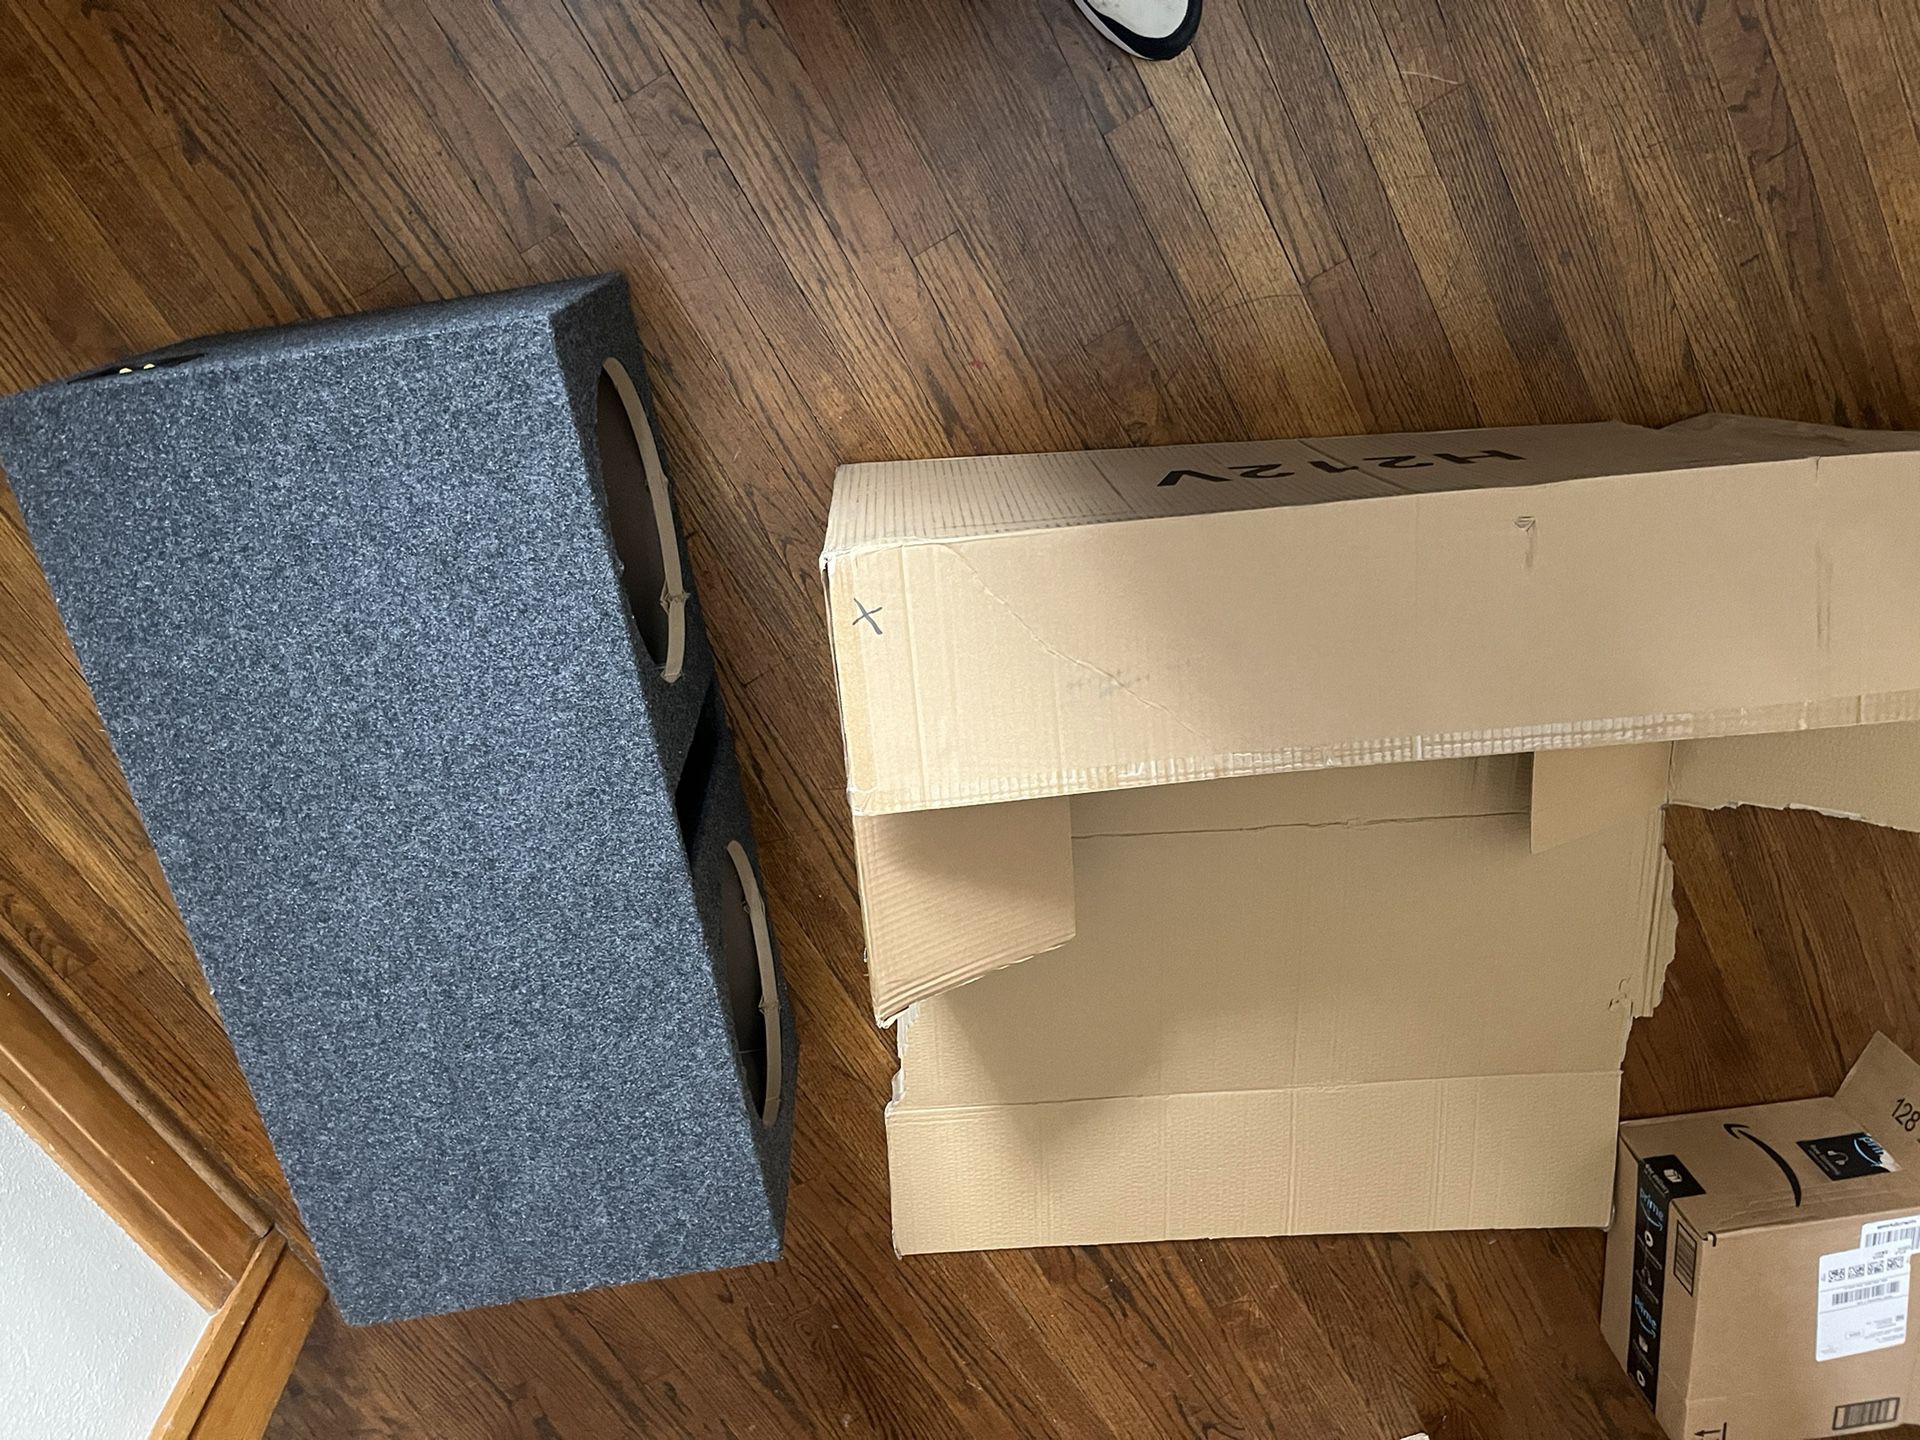 12”inch subwoofer imported box 